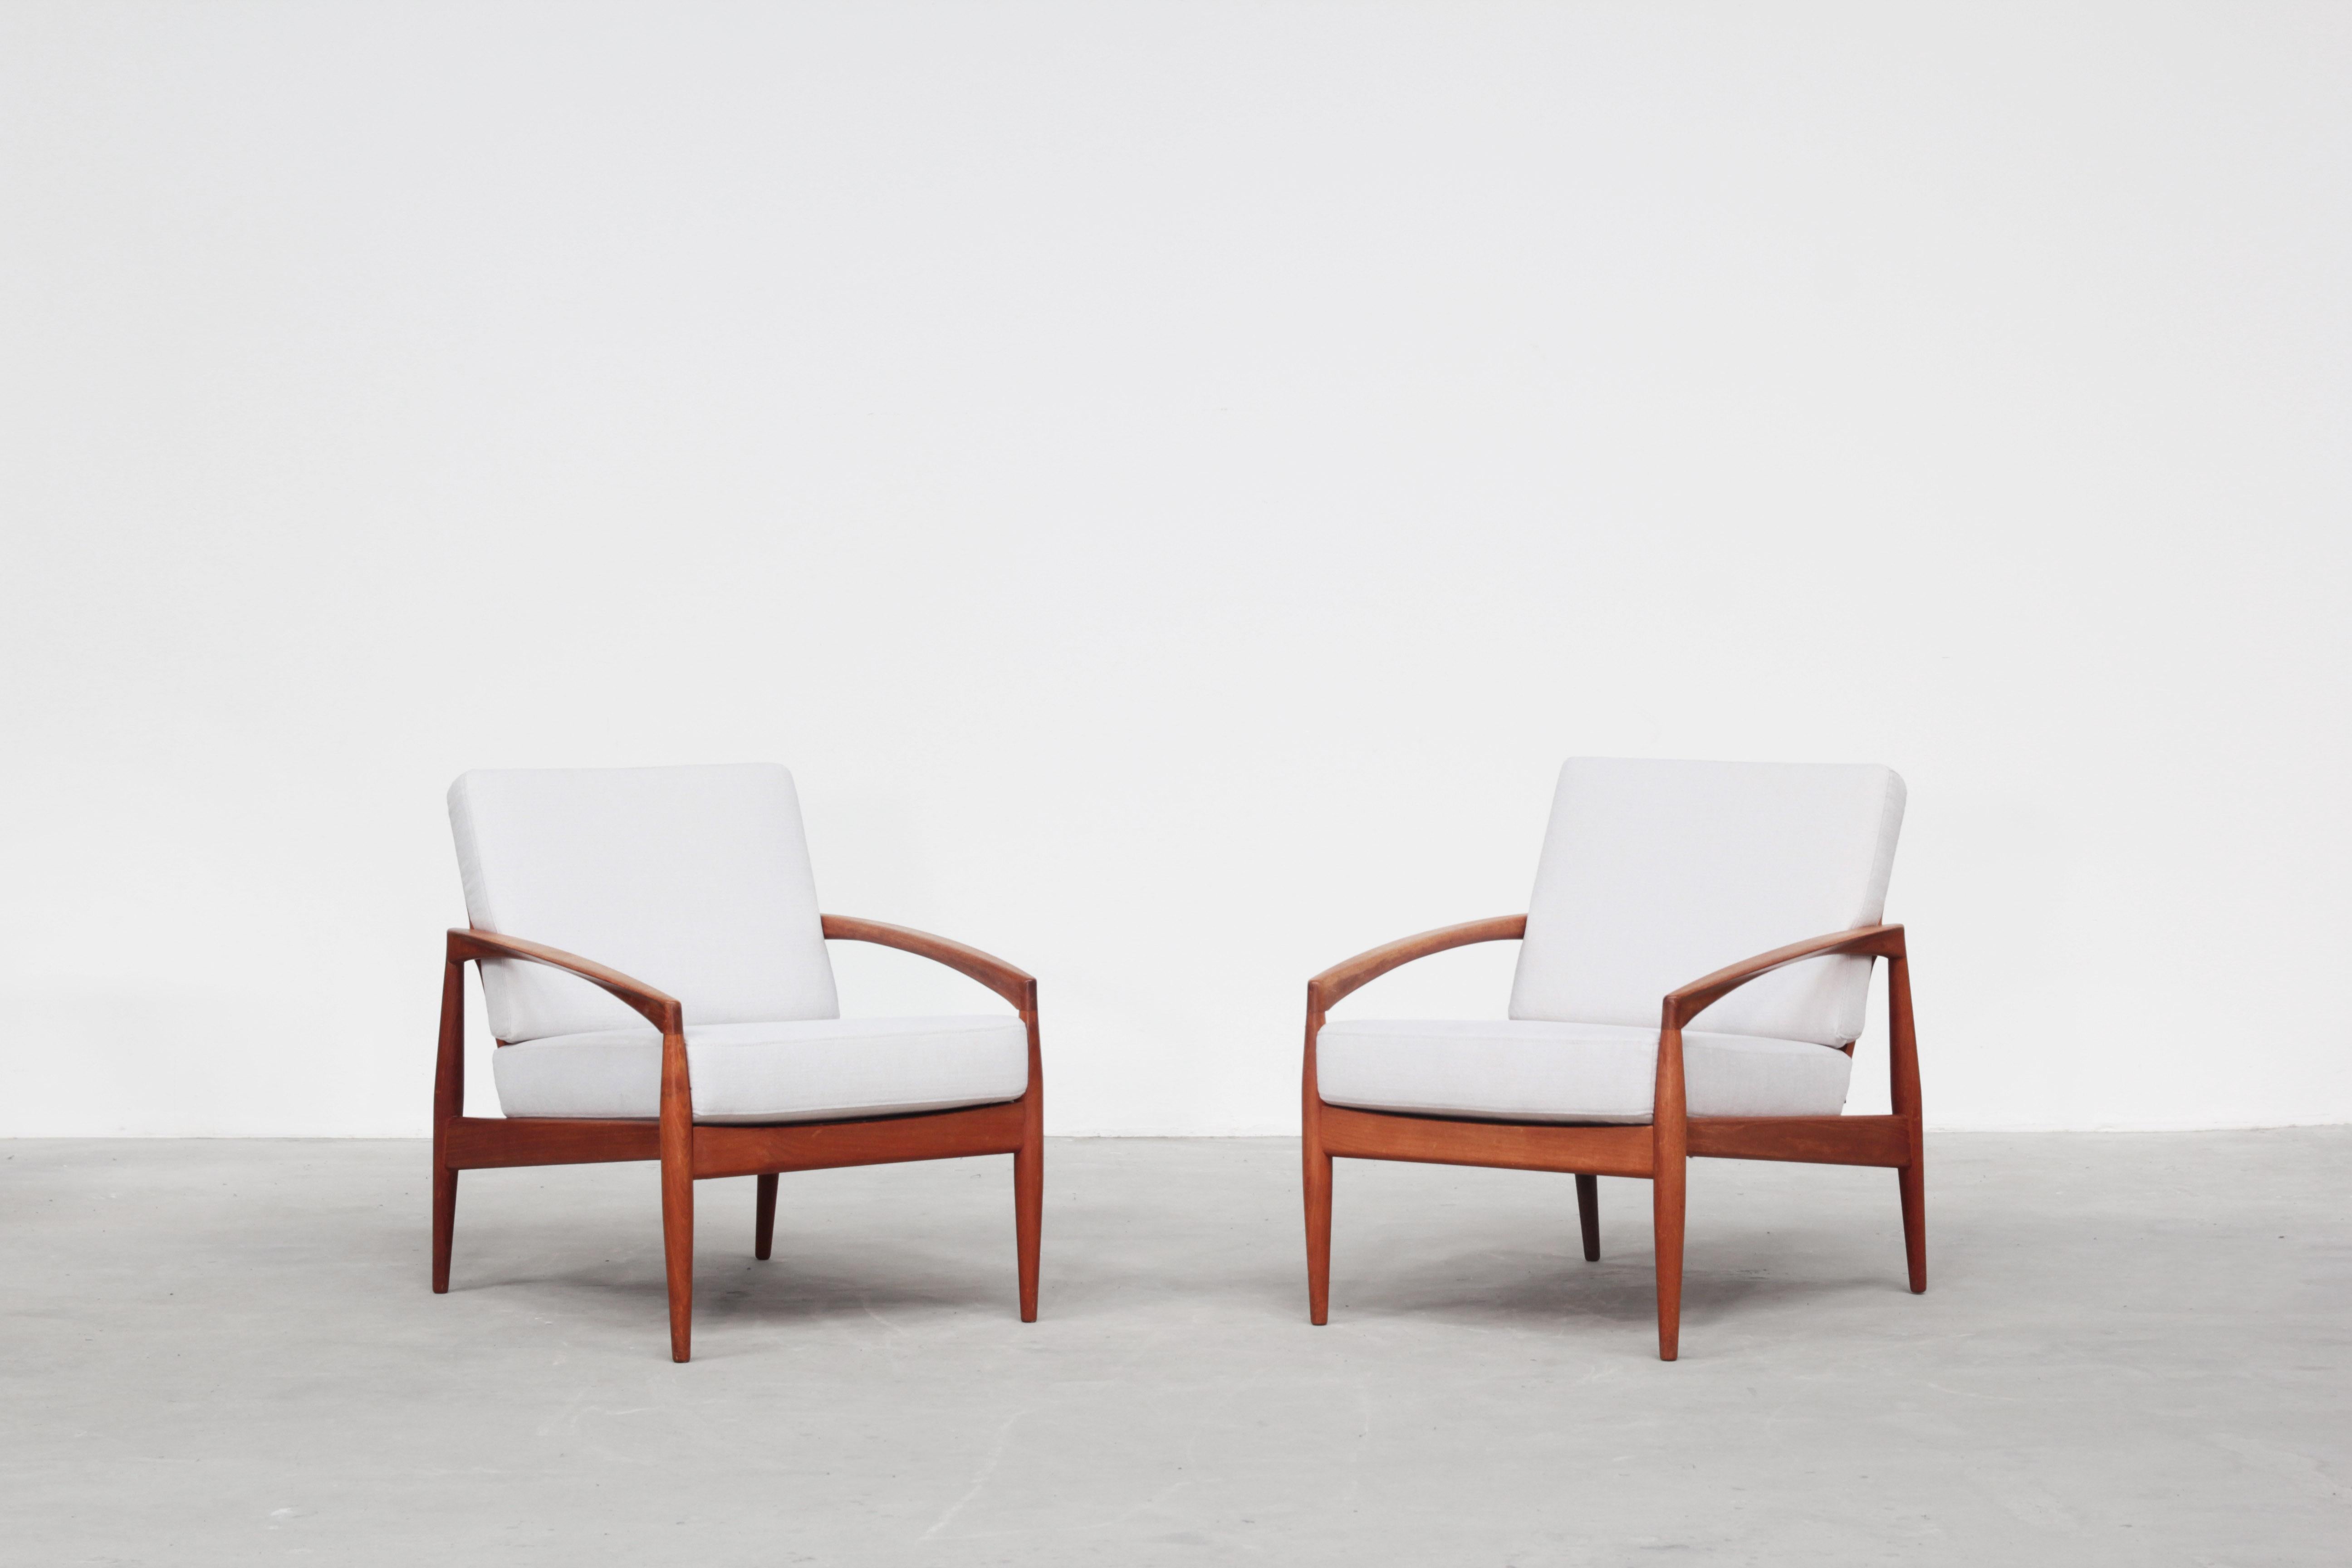 A pair of lounge chairs mod. Paperknife by Kai Kristiansen for Magnus Olesen. Both chairs are in excellent condition with just minimal signs of use. The frame is made out of teak wood and the cushions were newly covered with high-quality fabric in